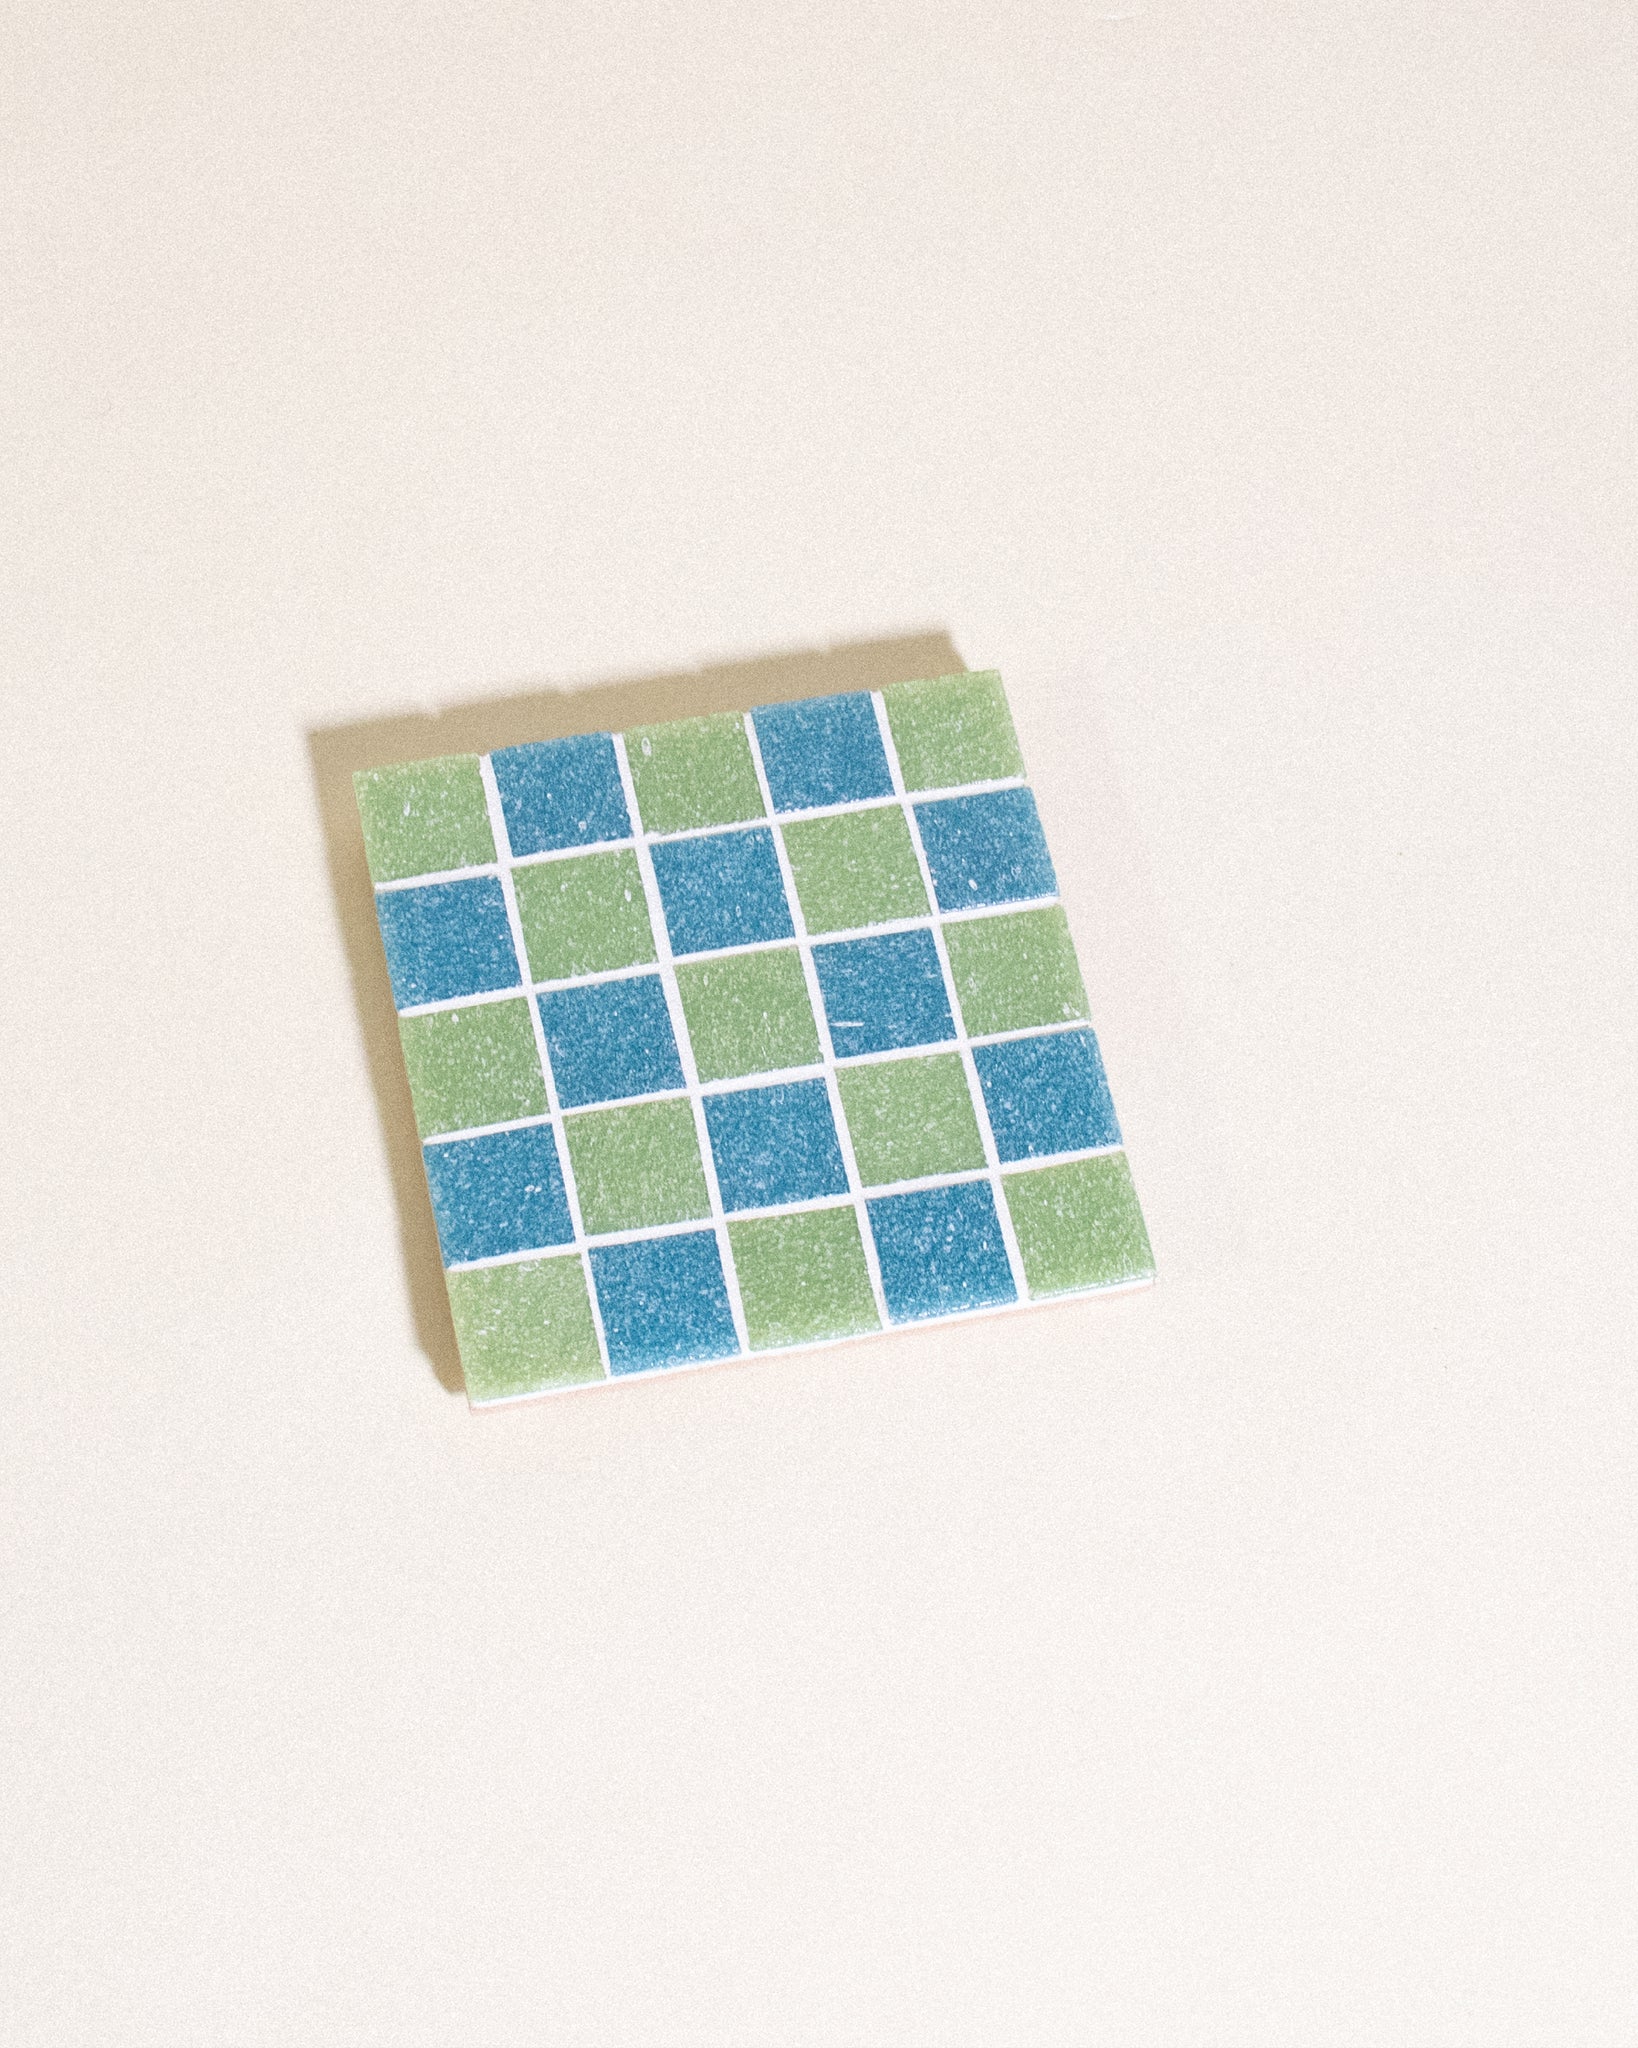 GLASS TILE COASTER - Sour Patch Candy - 07